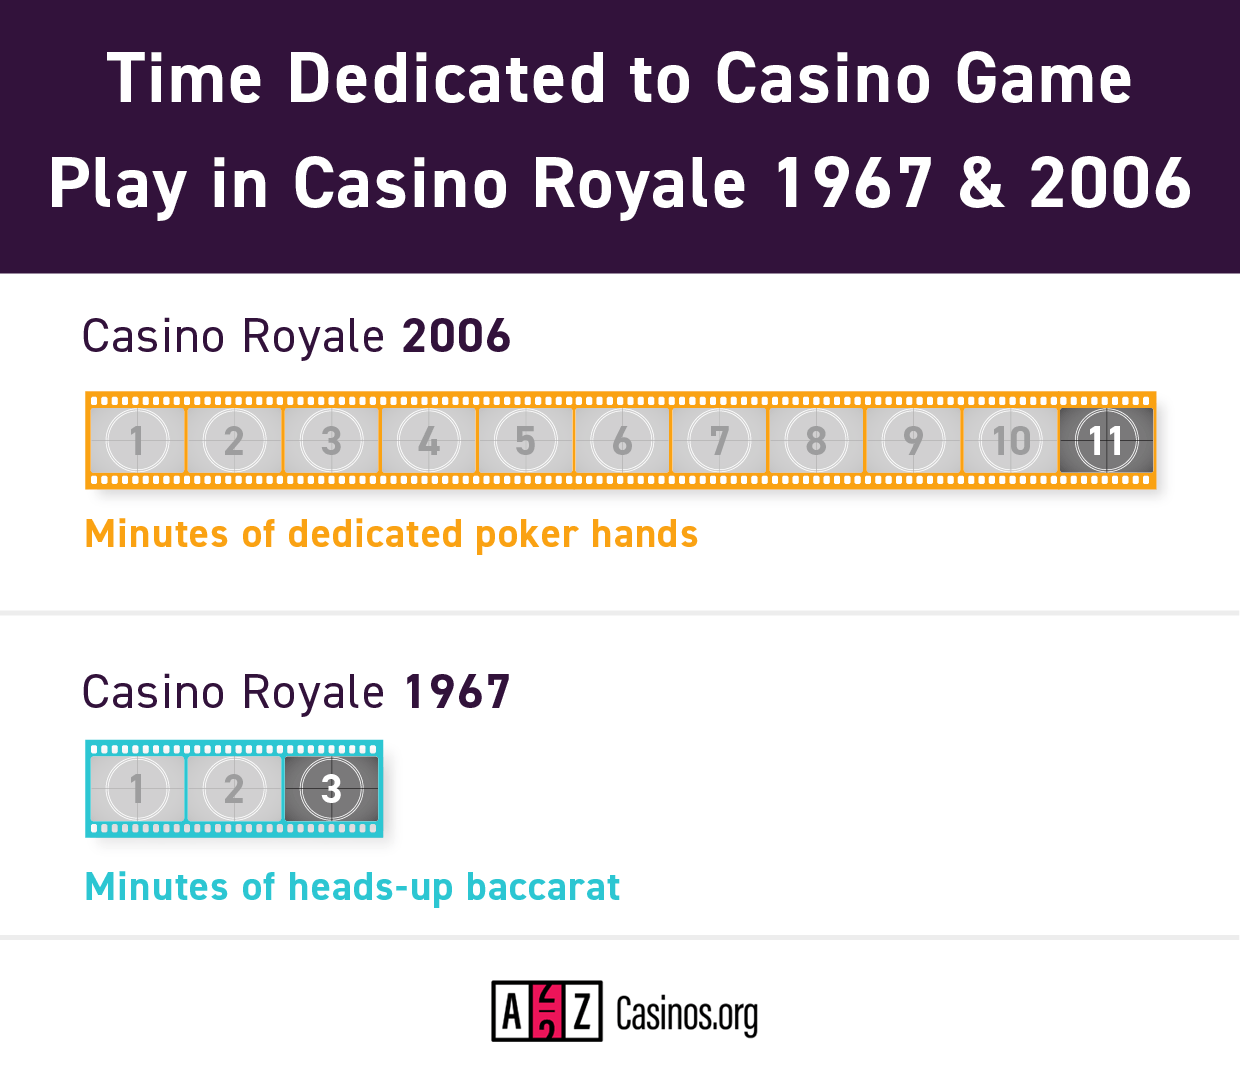 Time Dedicated to Casino in Casino Royal 1967